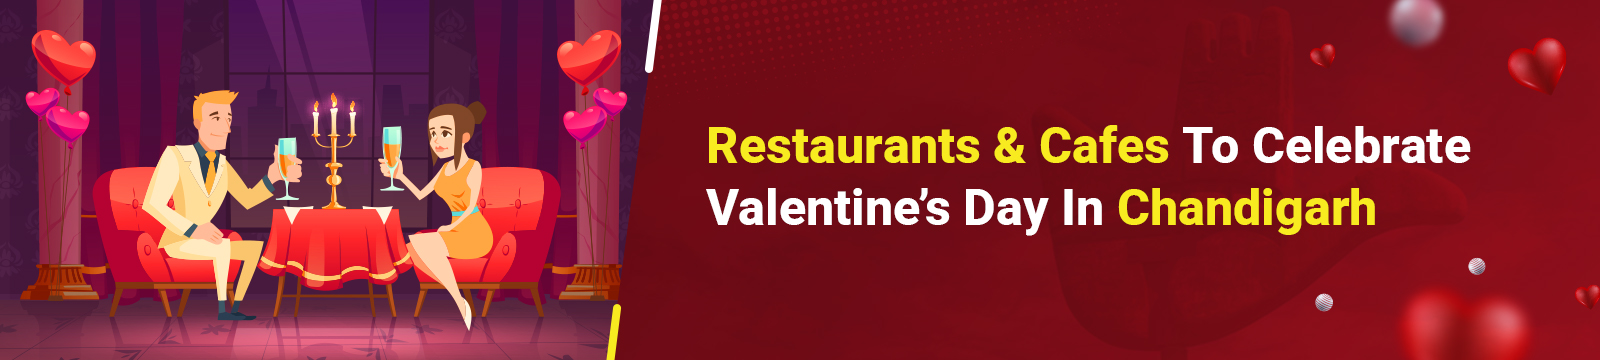 11 Romantic And Chilled Out Restaurants & Cafes to Celebrate Valentine’s Day in Chandigarh